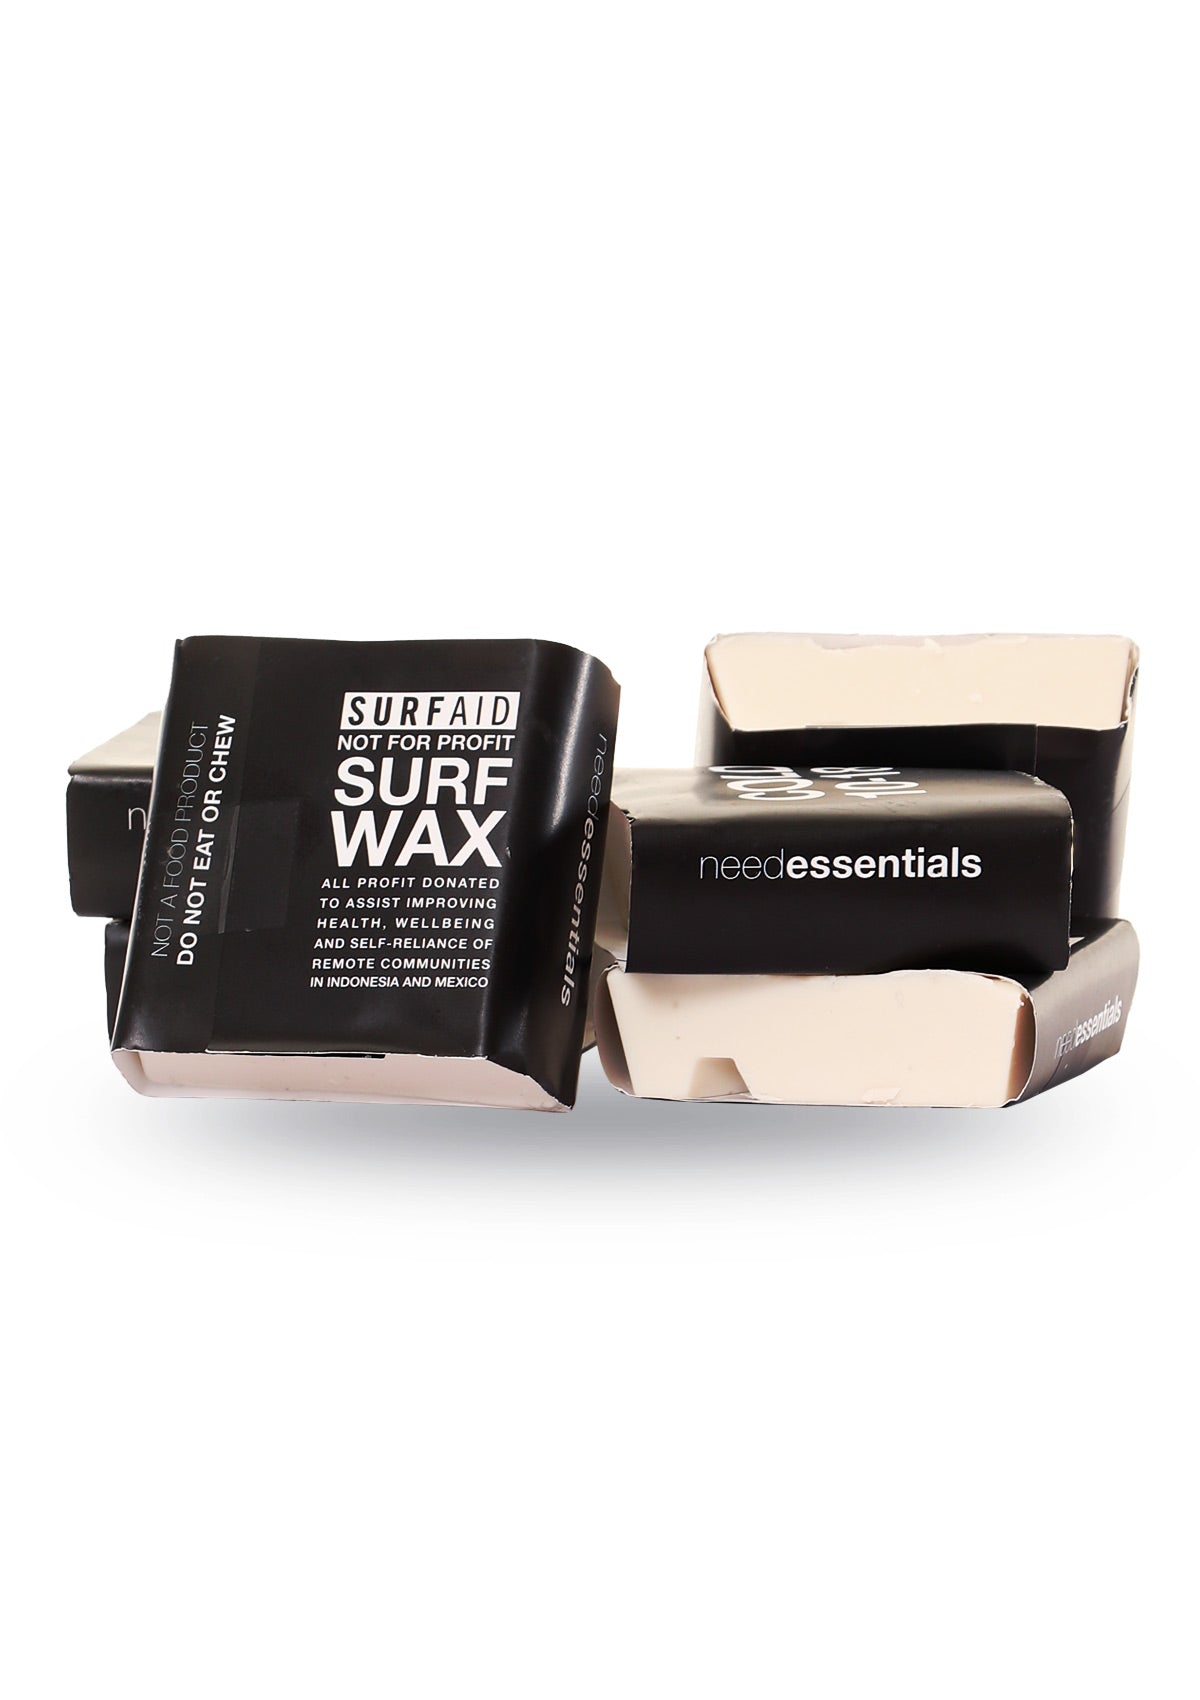 SurfAid Not-For-Profit Wax